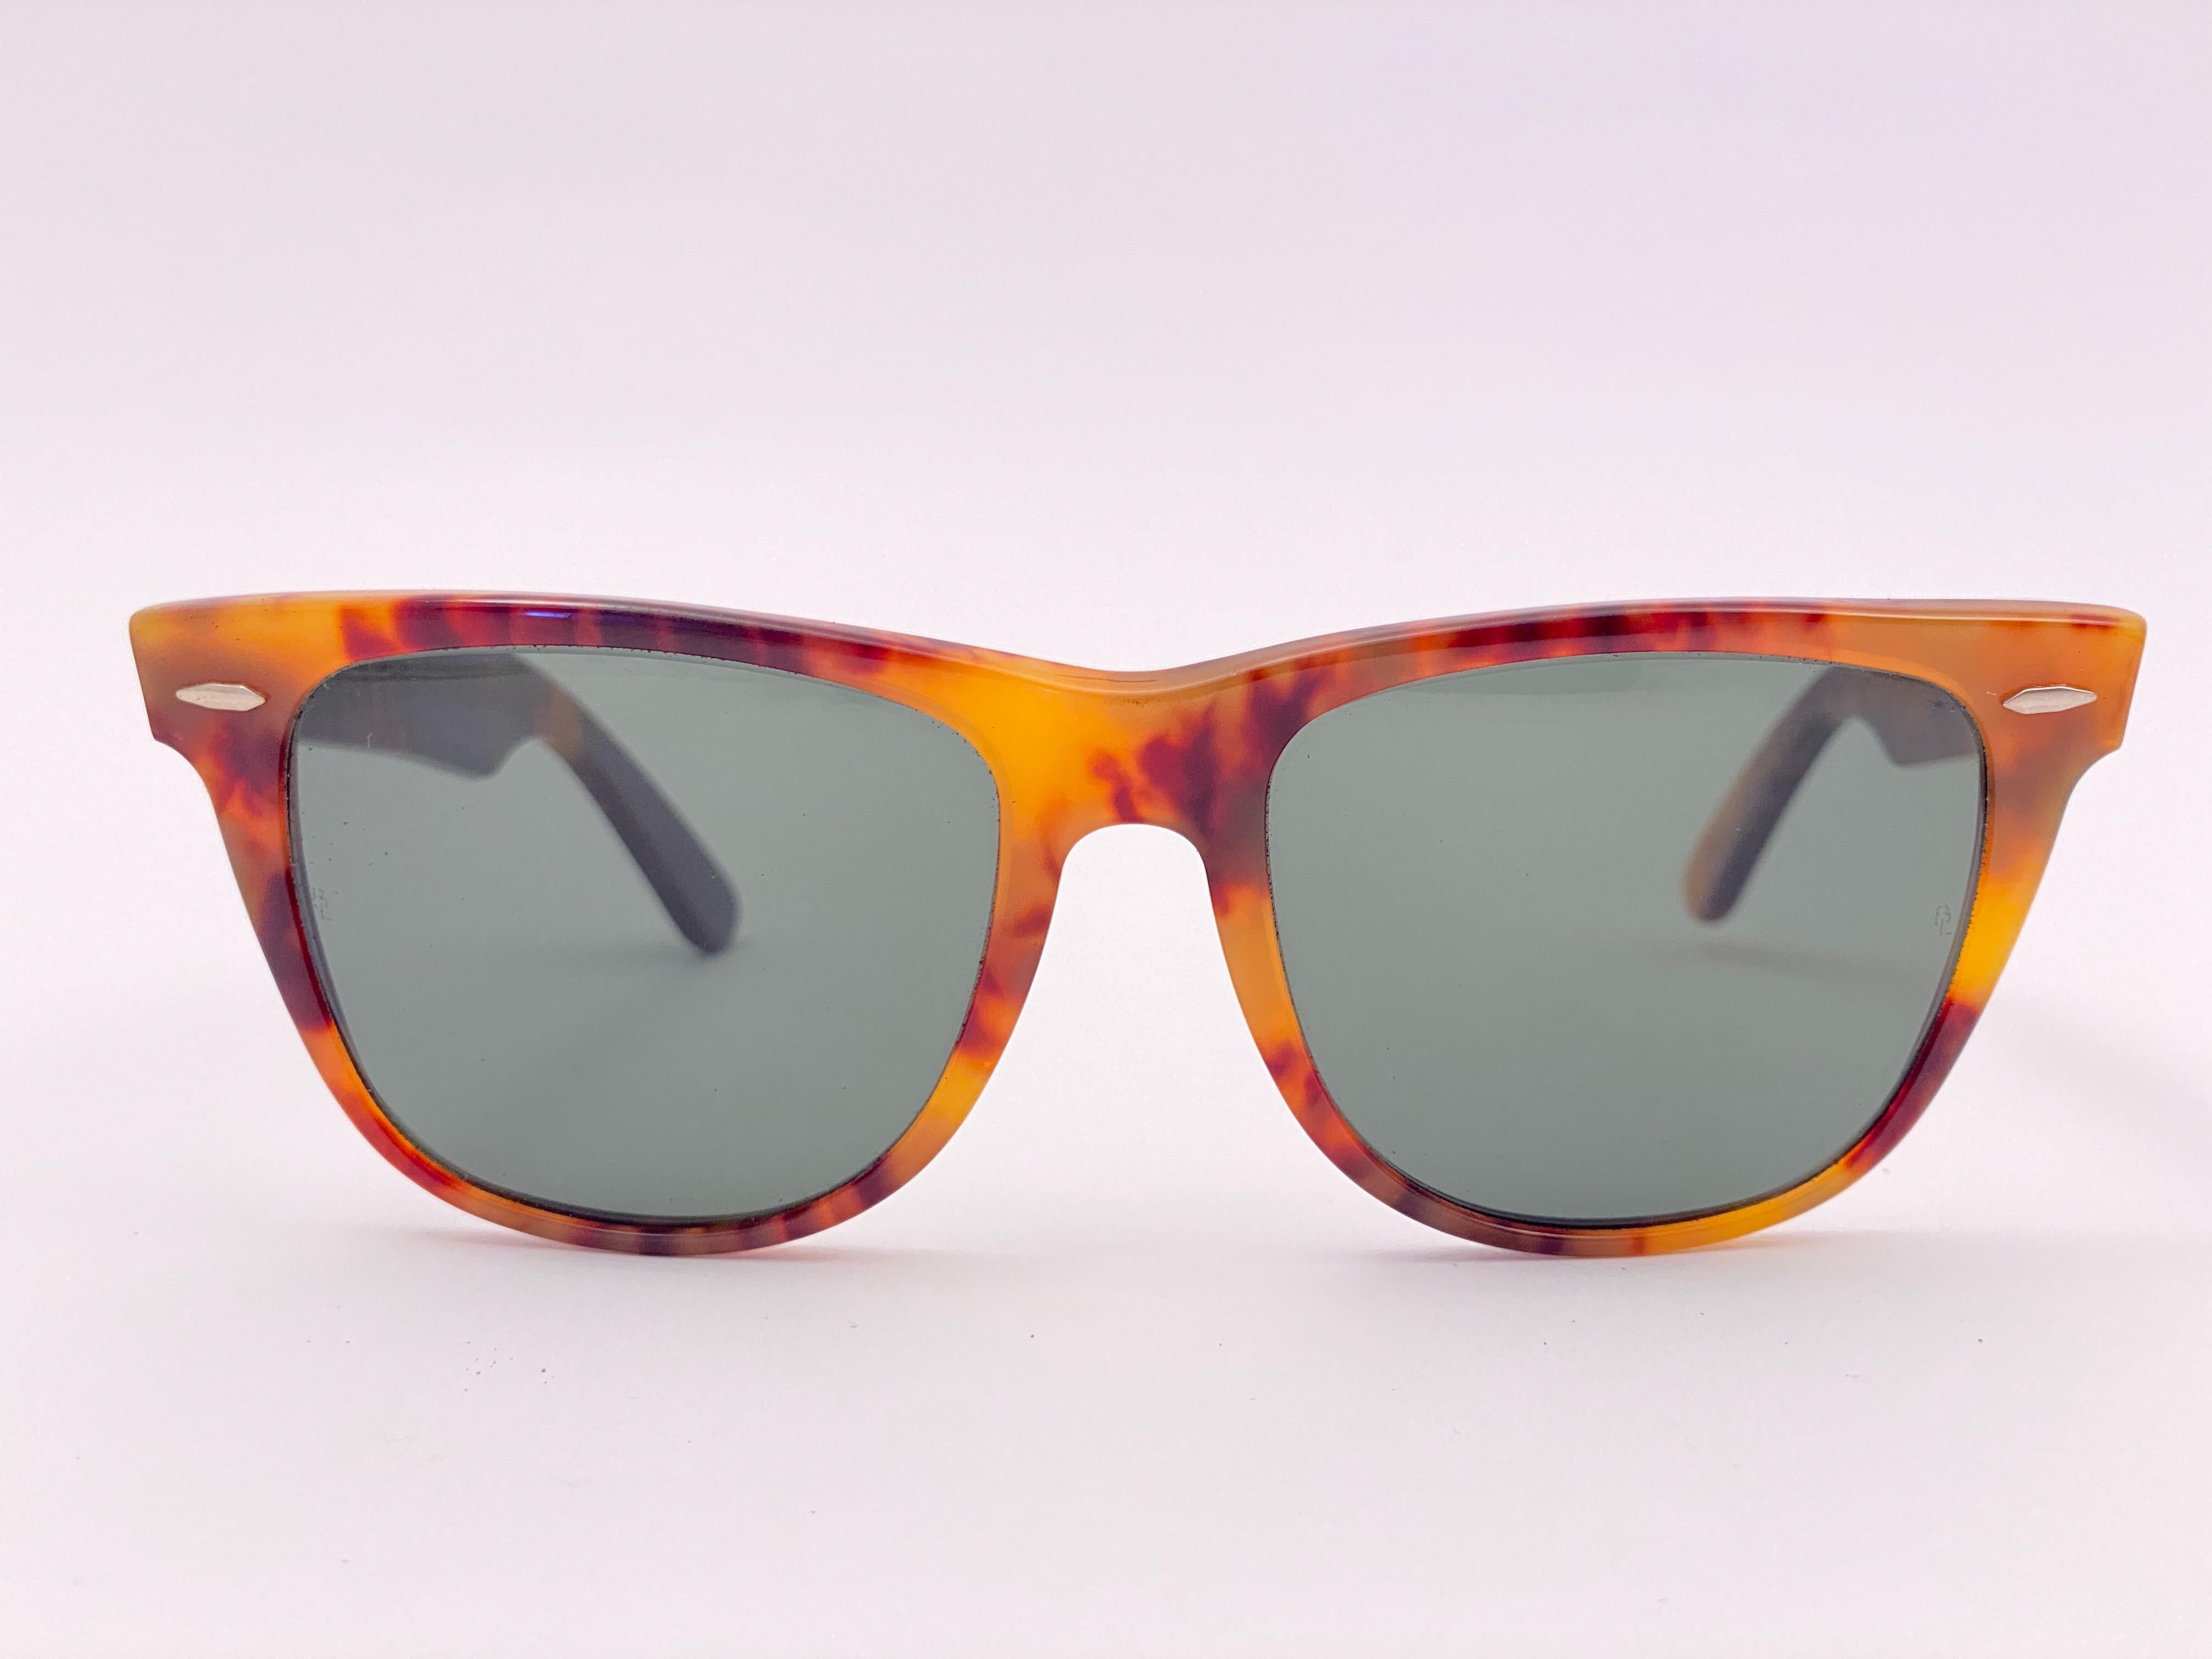 New classic Wayfarer in medium tortoise. 
B&L etched in both G15 grey lenses. Please notice that this item is nearly 40 years old and show some storage wear.  

Made in USA.